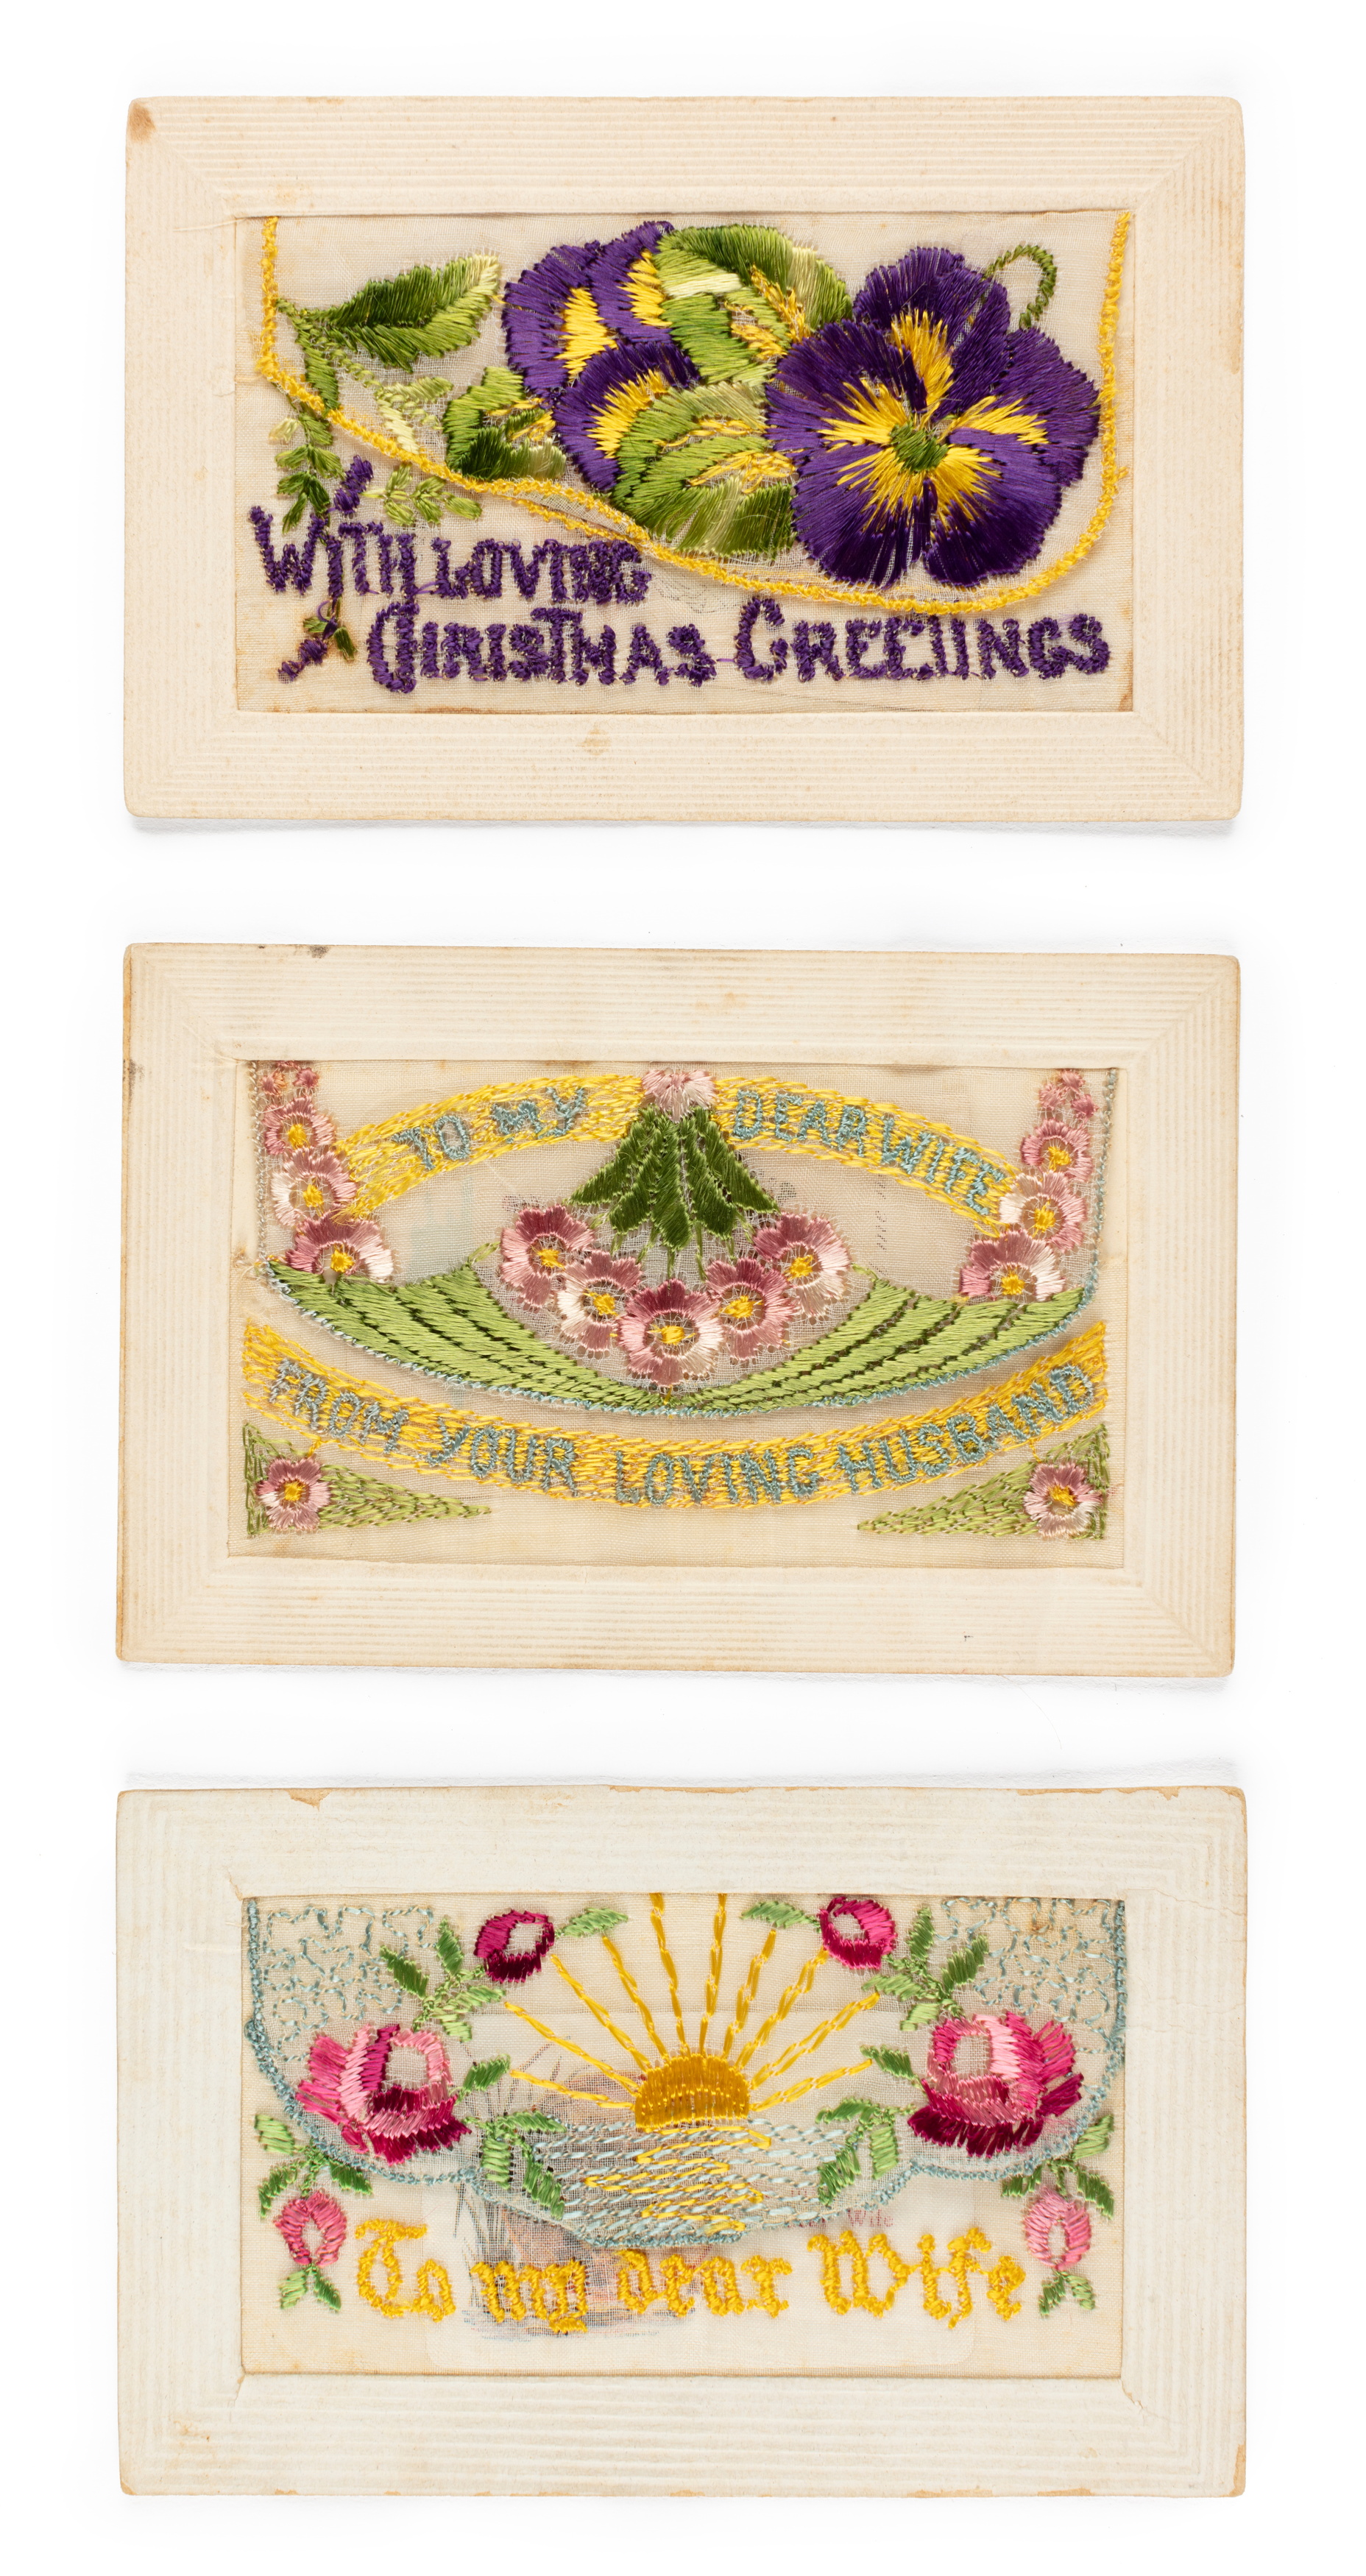 Collection of greeting cards from France during World War I